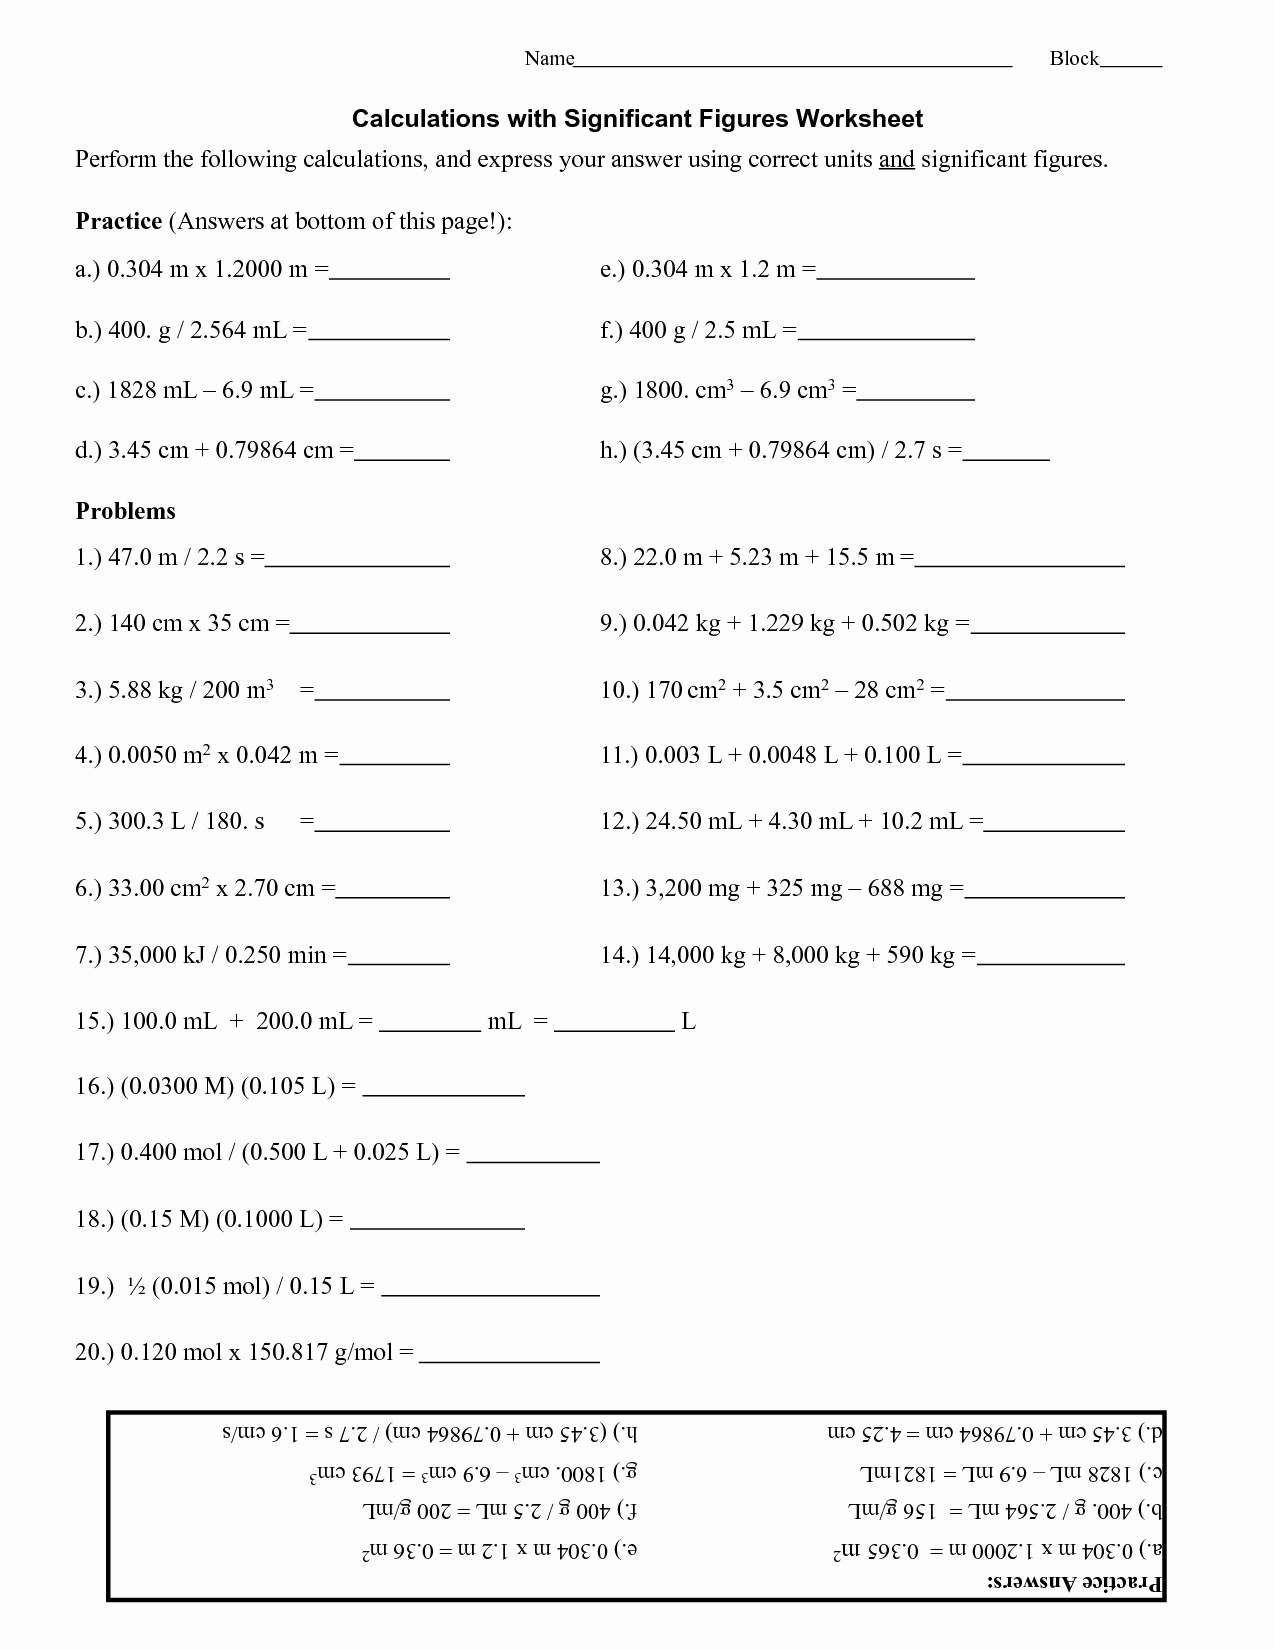 Significant Figures Worksheet with Answers Unique Worksheet Significant Figure Practice